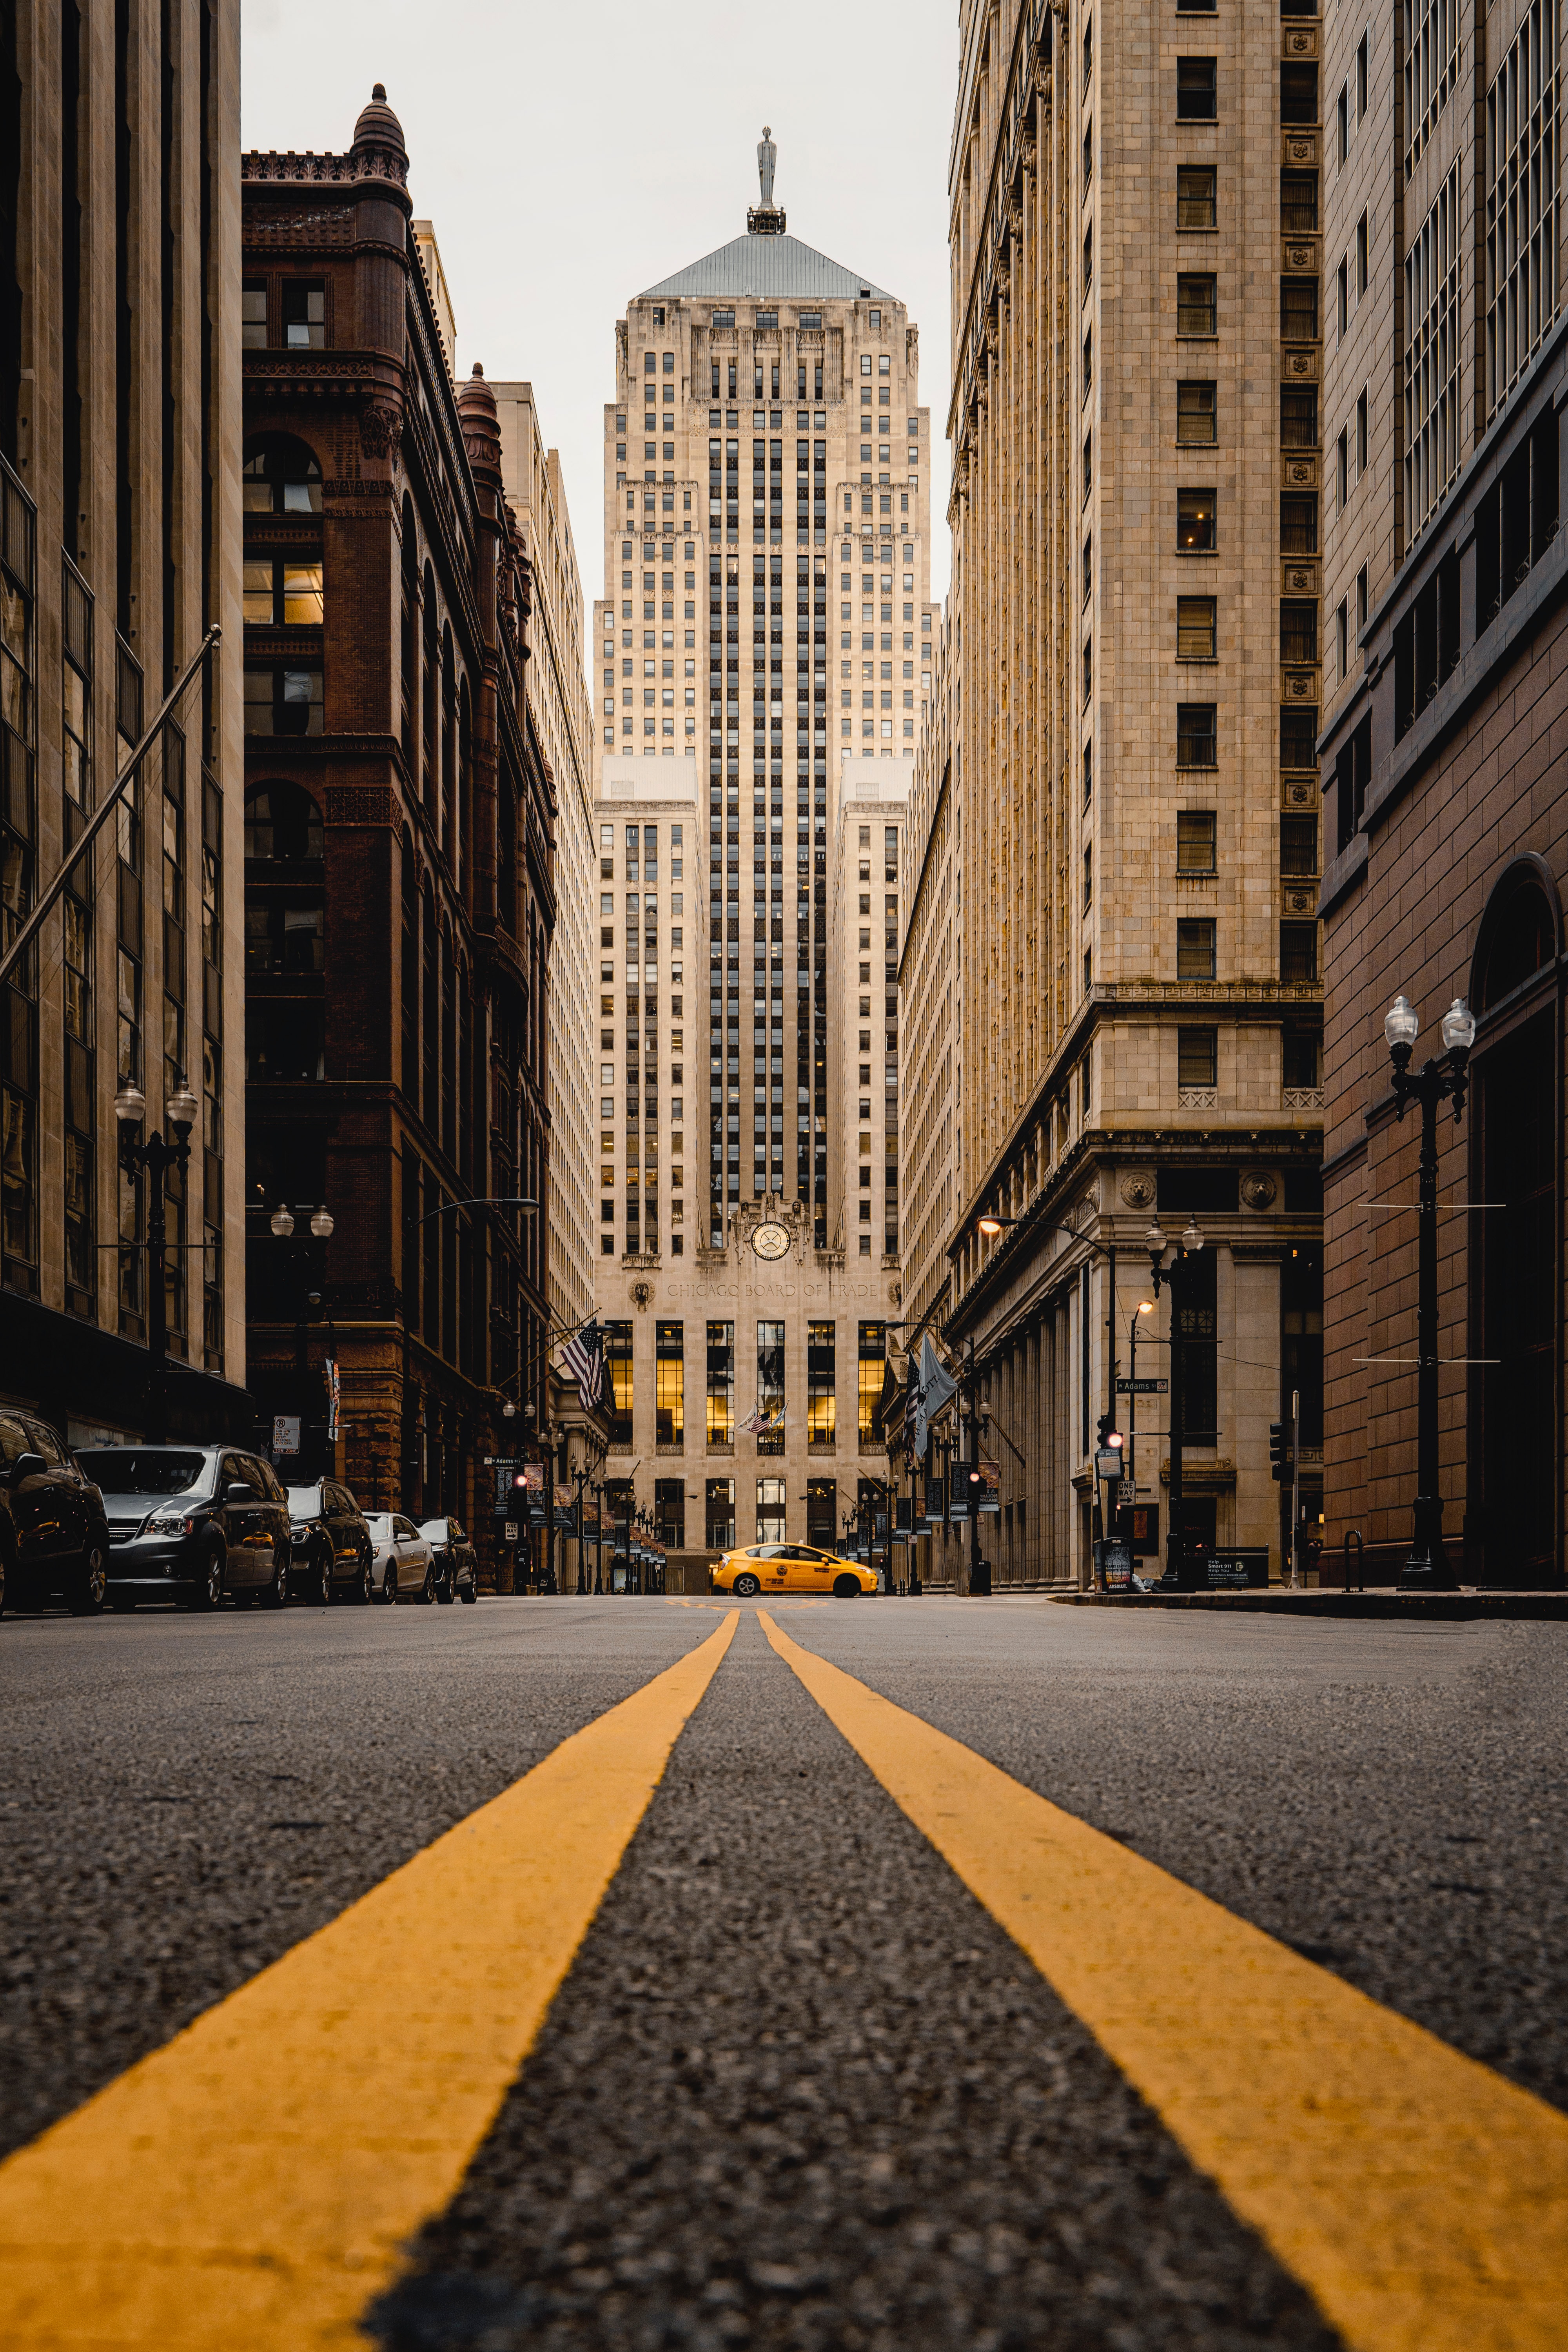 100 Building Pictures  Images HQ  Download Free Photos on Unsplash